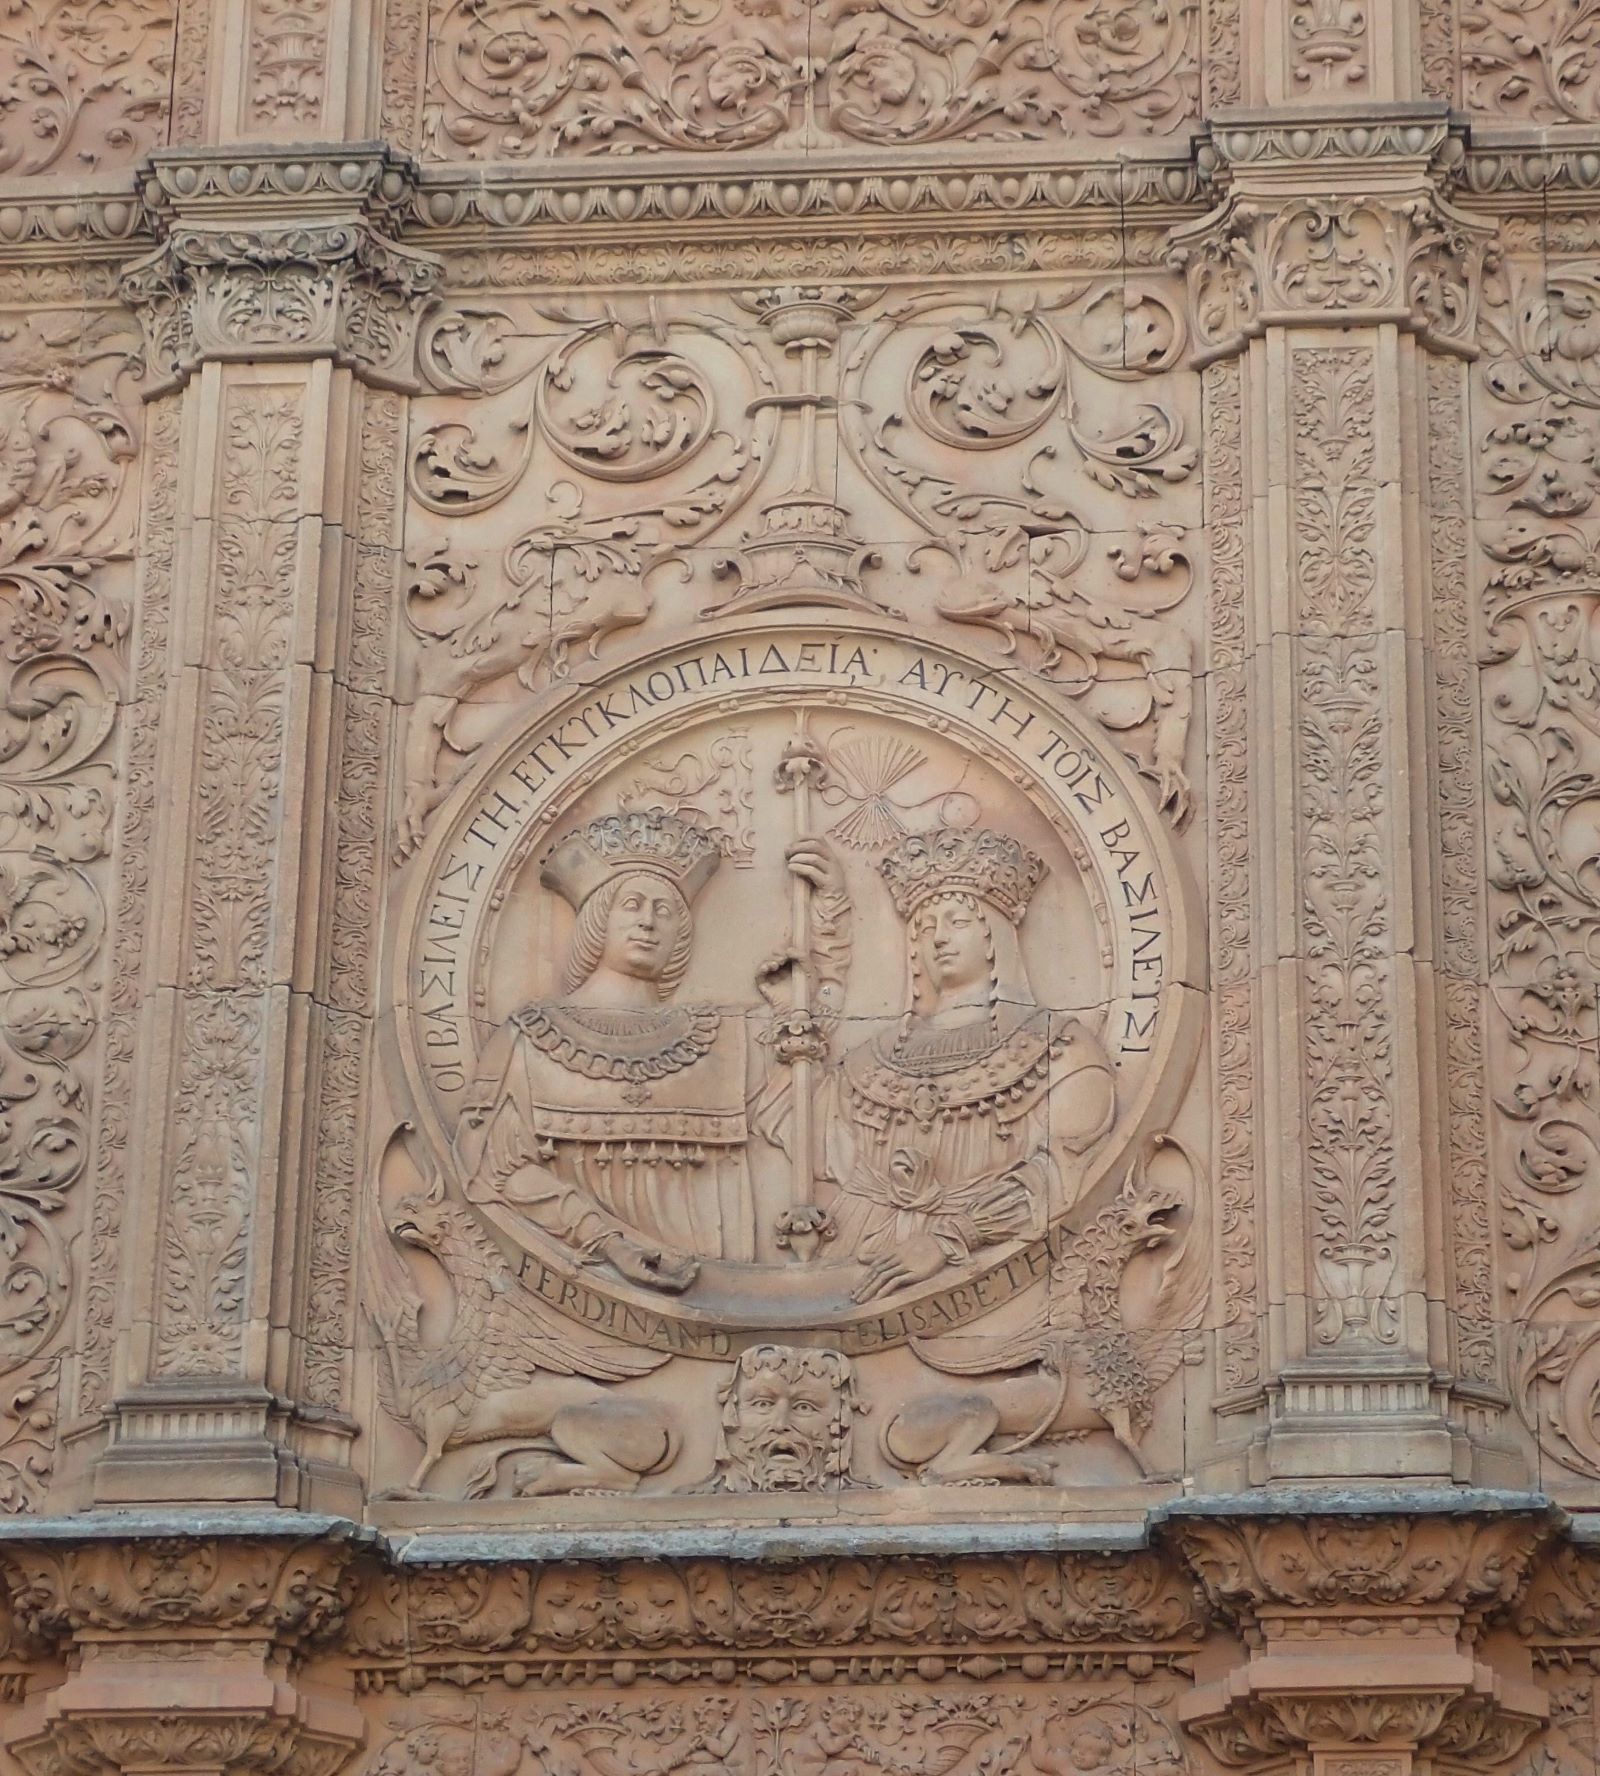 Medallion of the Catholic Monarchs, Ferdinand and Isabella, on the entrance façade to the University of Salamanca